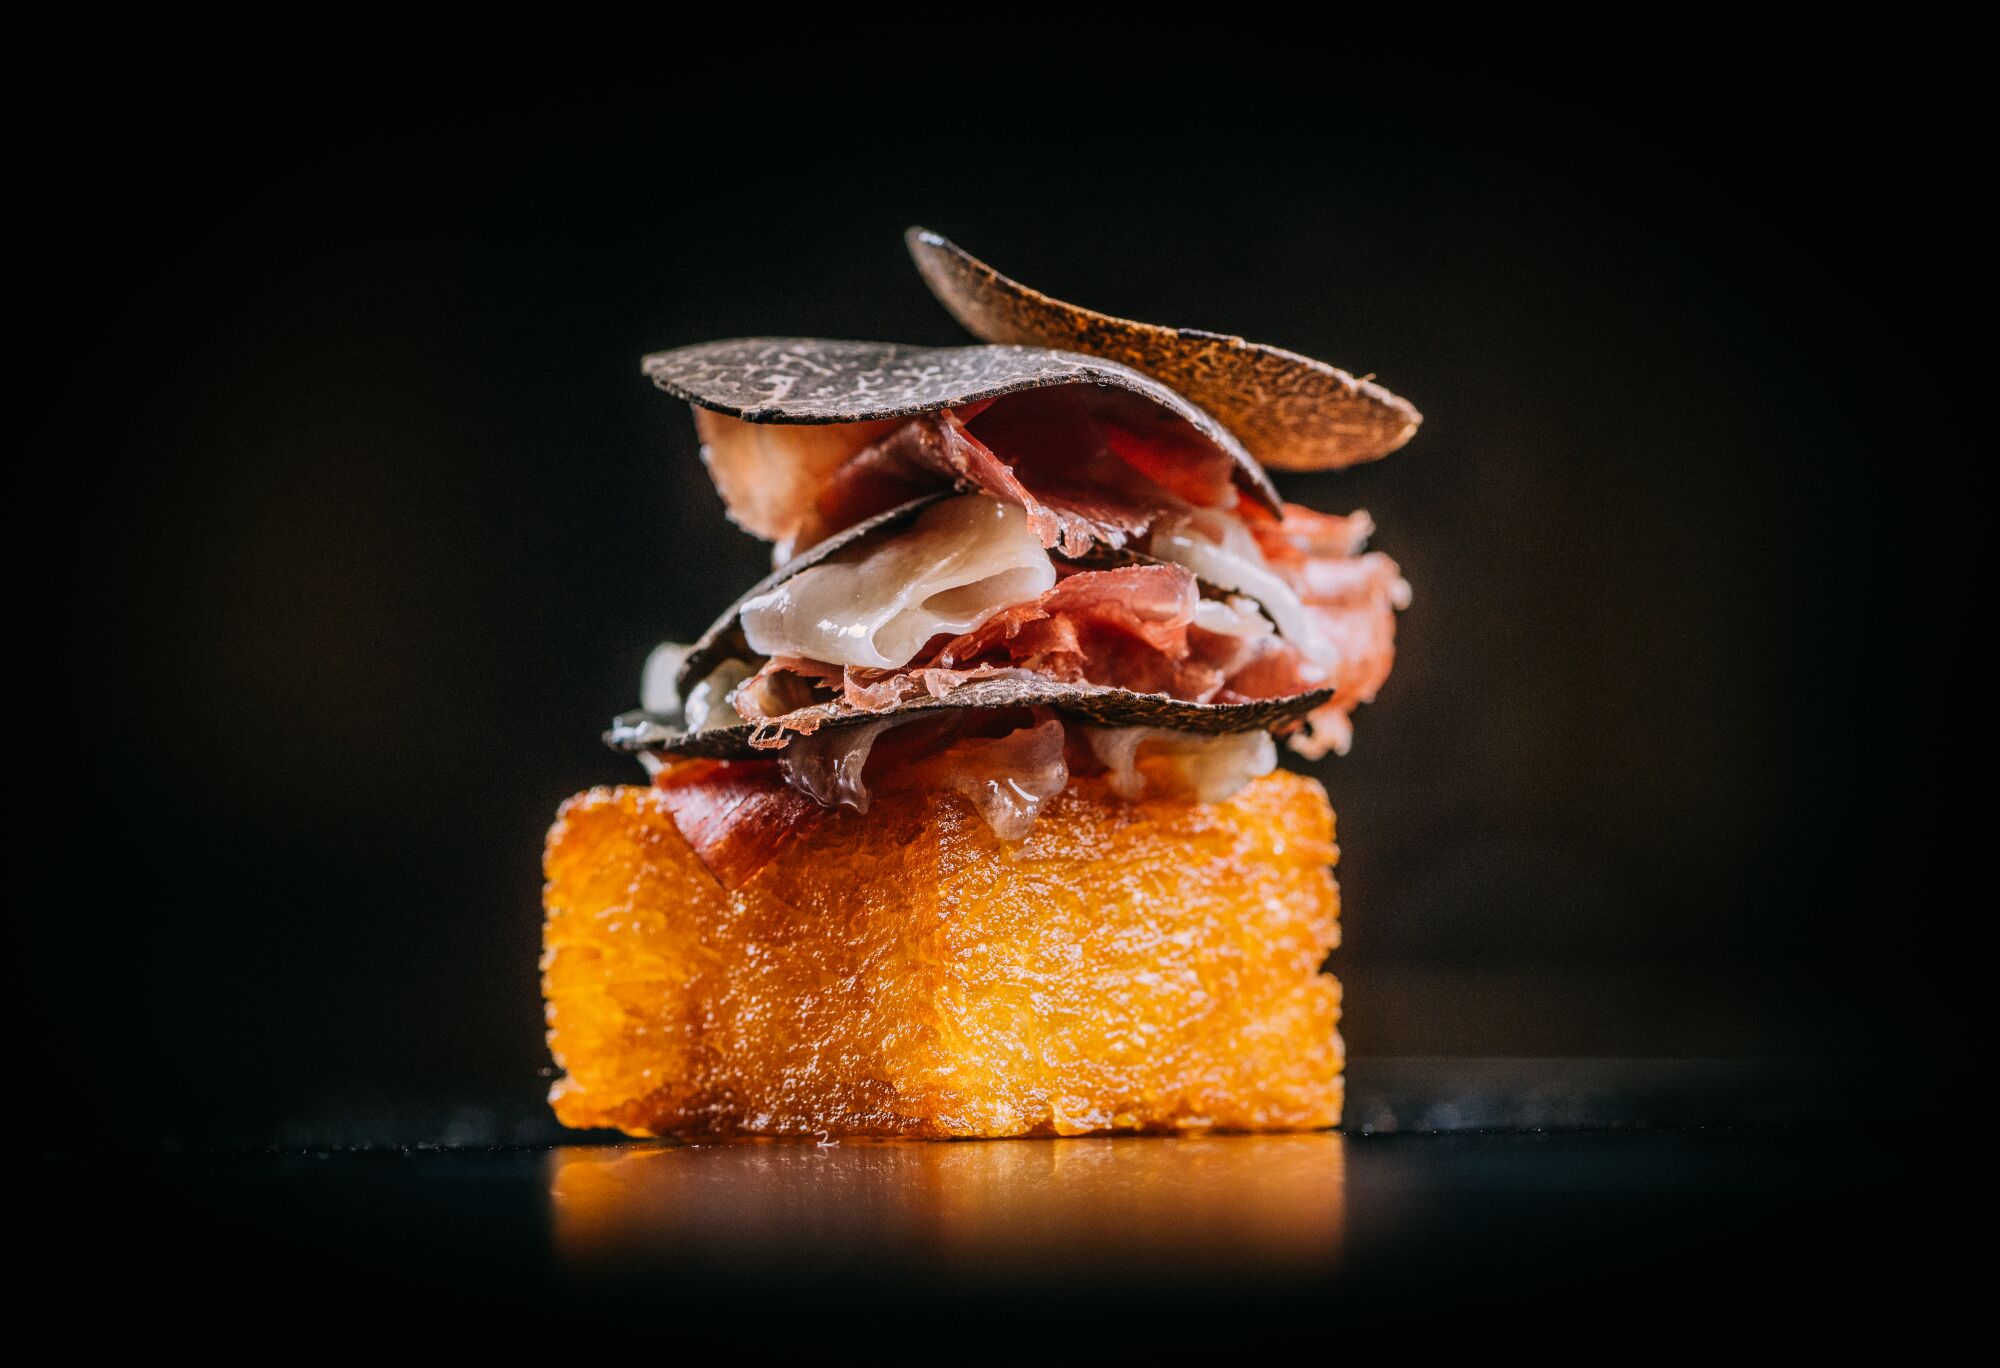 A finished shot by Eric Wolfinger of a crispy potato, Iberian ham and black truffle bite at Addison restaurant in San Diego.